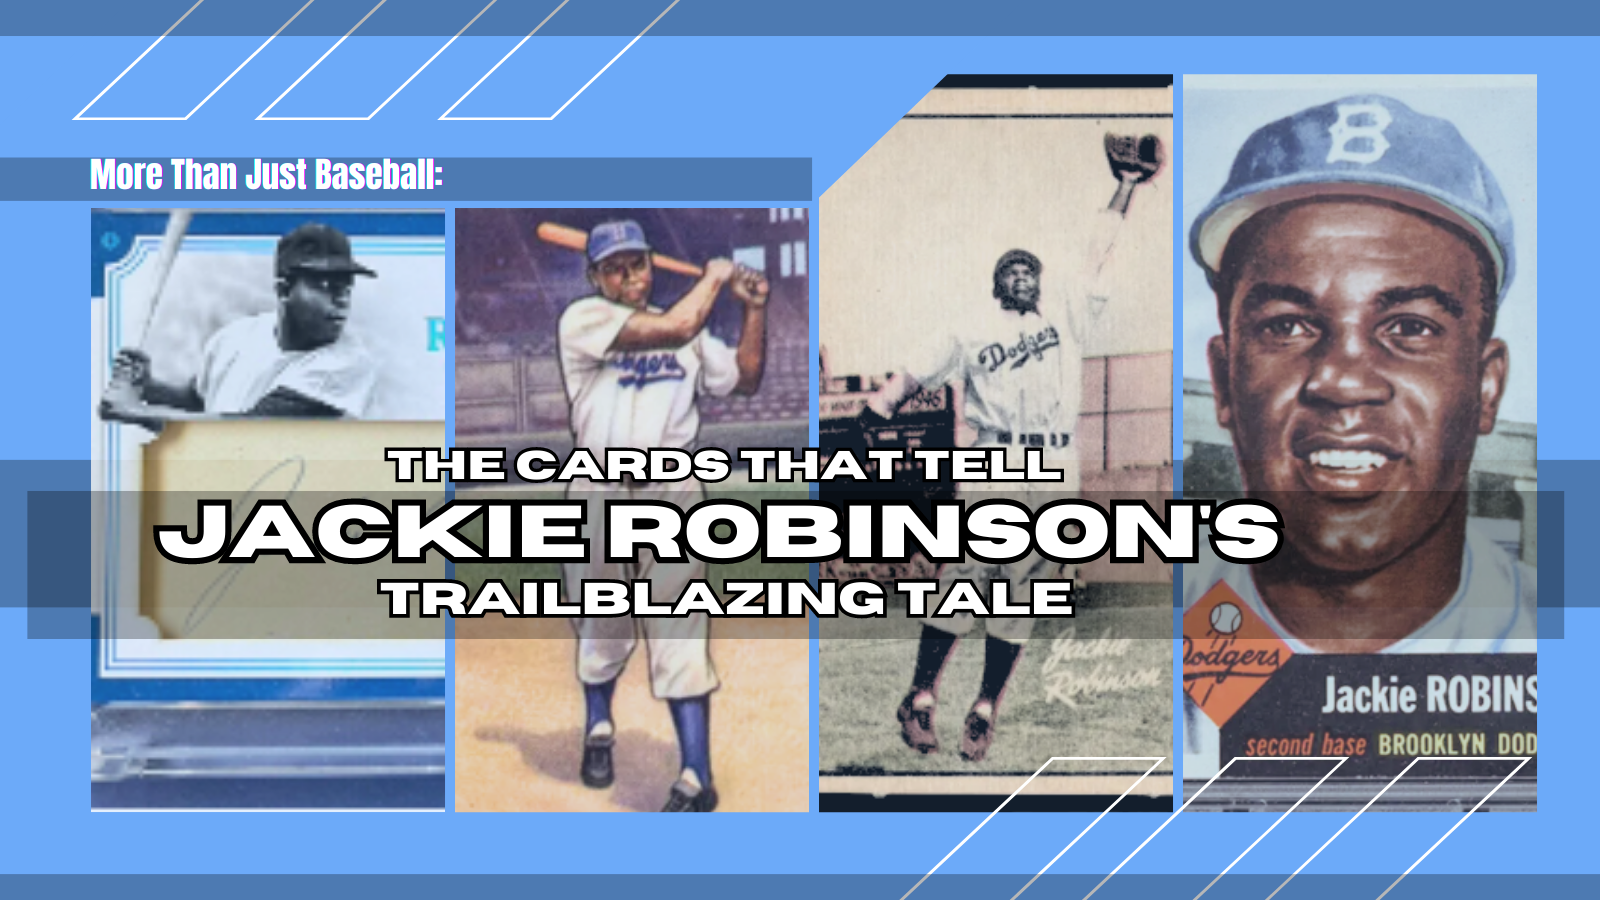 Jackie Robinson - Jackie Robinson baseball card from 1953, front and back